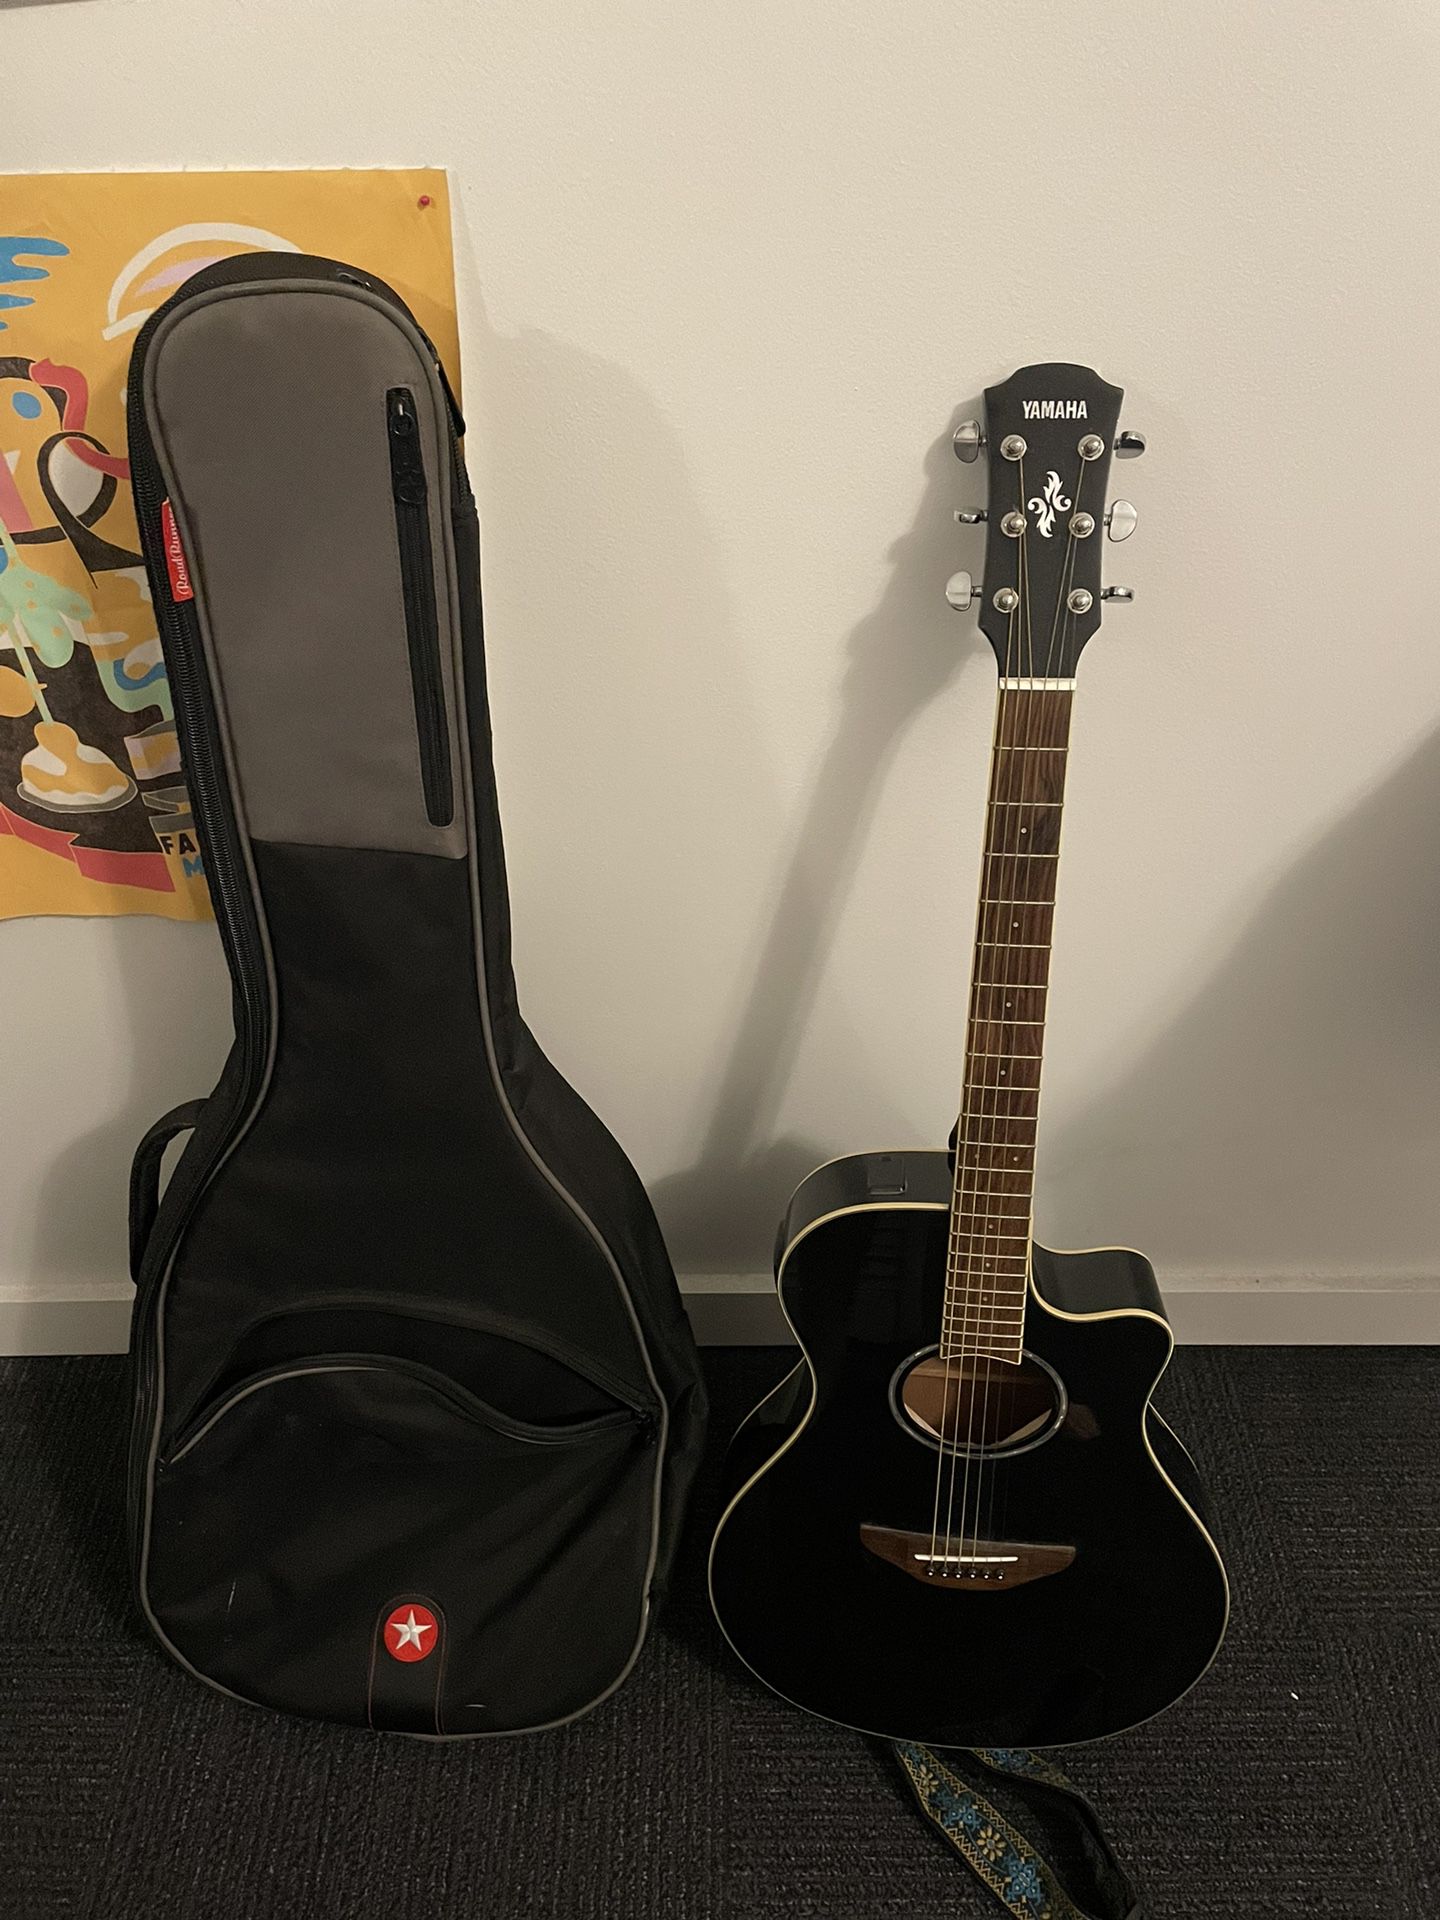 [BRAND NEW] Yamaha APX 600 Acoustic Electric Guitar, Case and Strap included